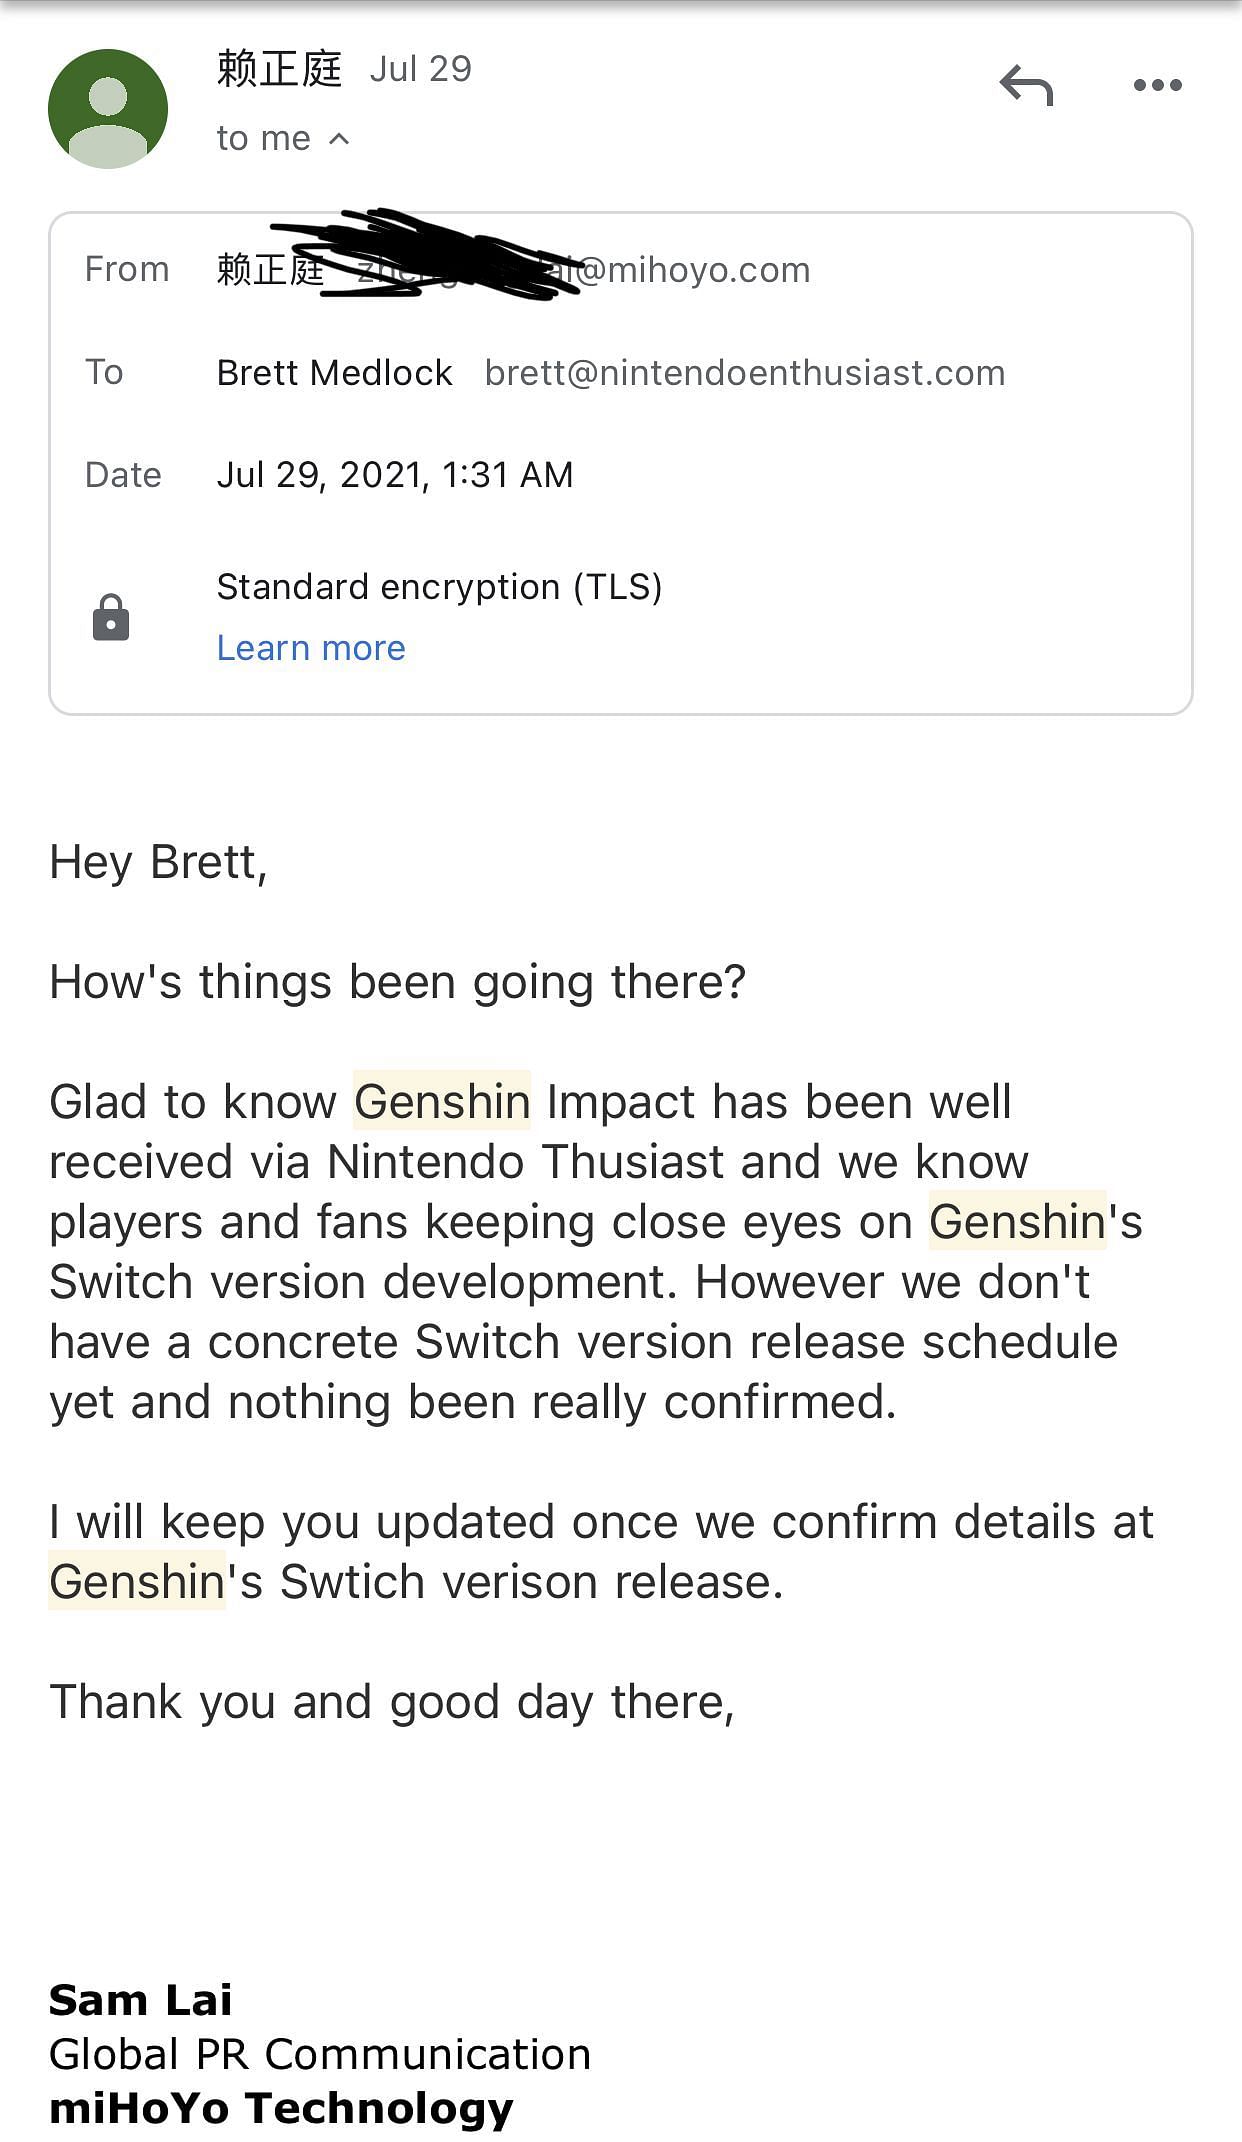 The email the video refers to (Image via Nintendo Enthusiast)